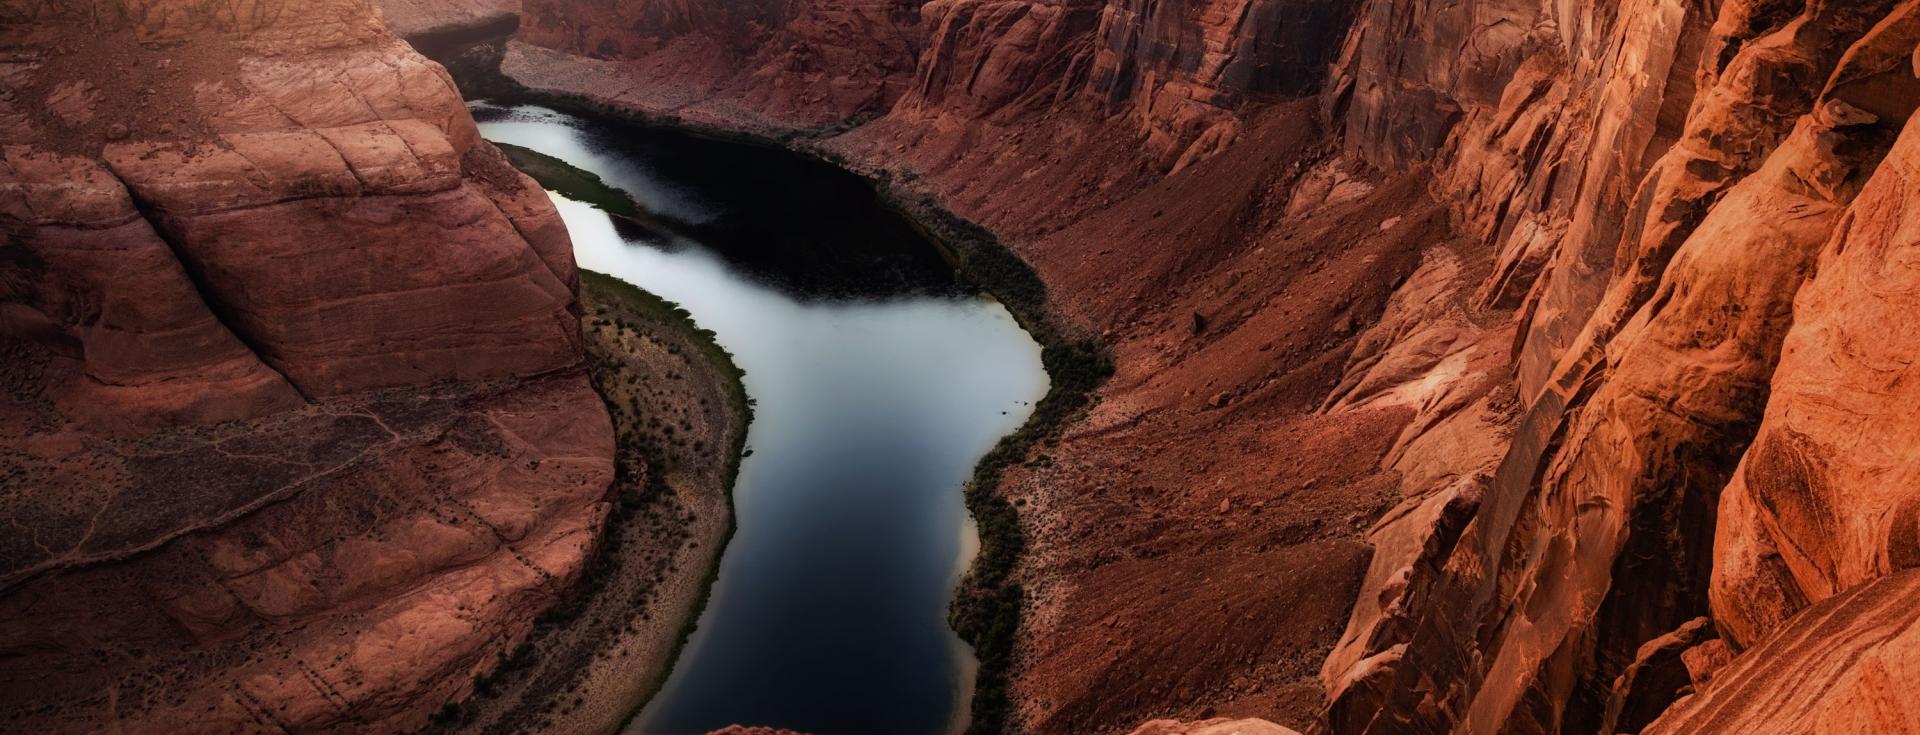 Drought conditions causing low levels in the Colorado River. Photo credit: GoodFocused, Shutterstock.